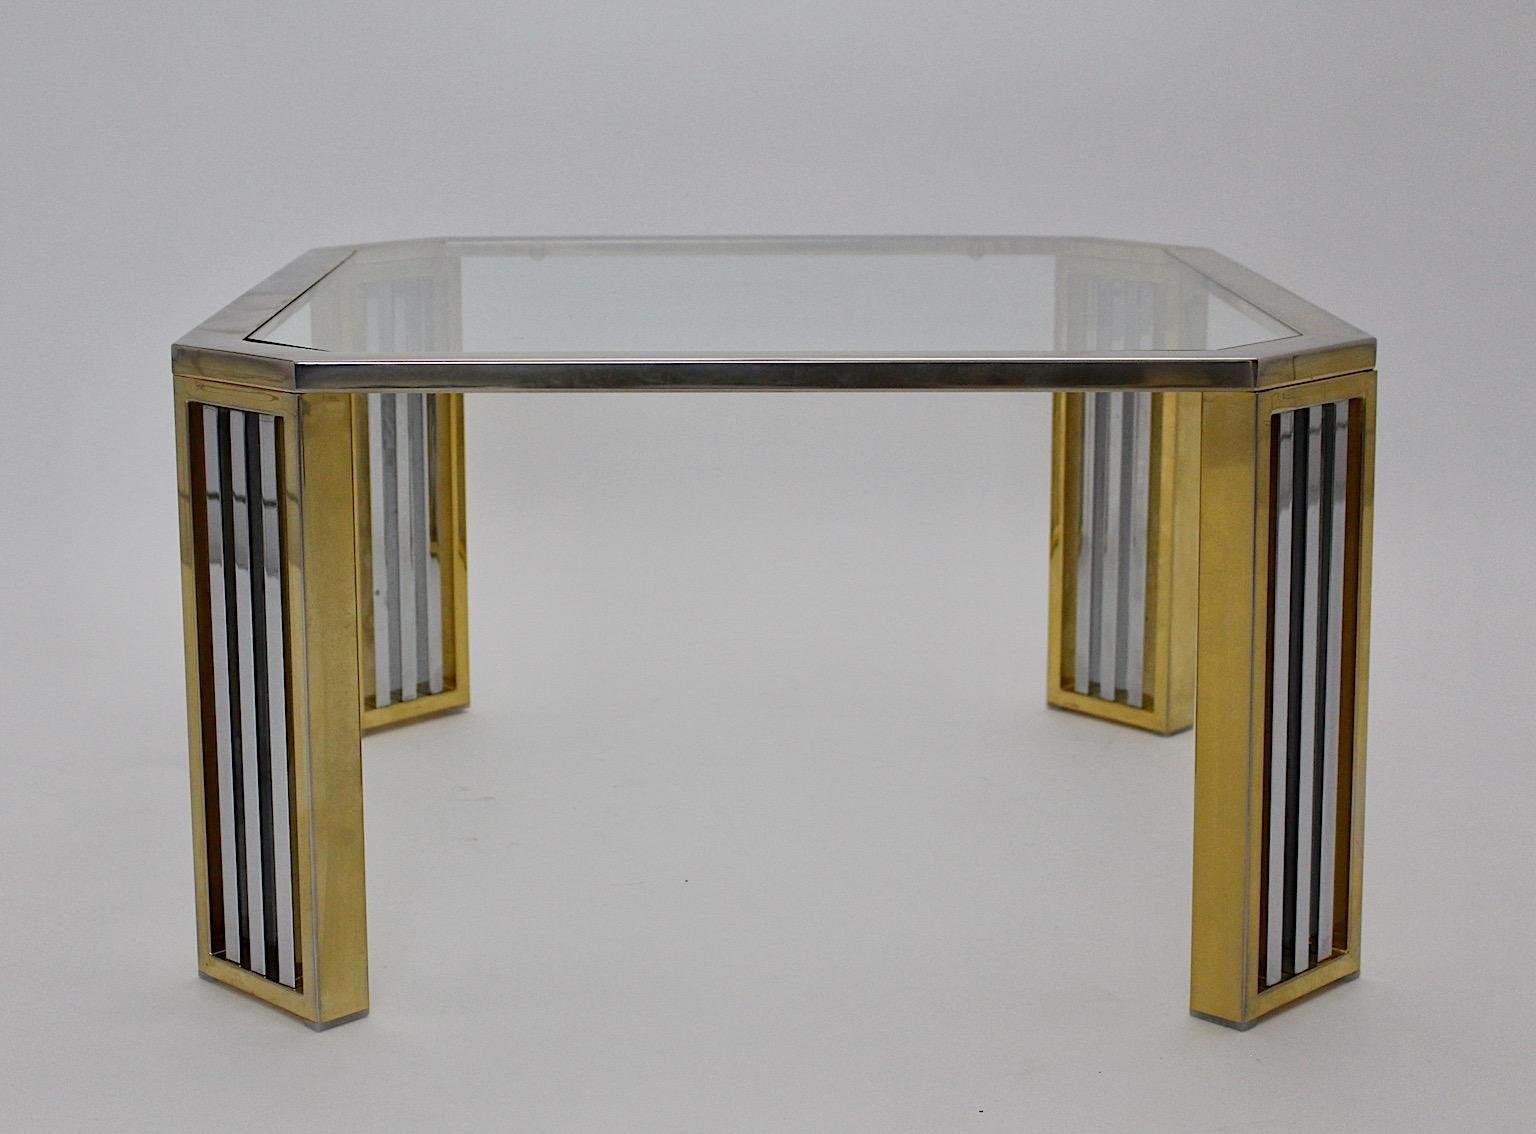 Modern vintage chromed metal and brass coffee table or sofa table, which was designed, Italy, 1970s.
Four brass feet with chromed openwork metal details make this coffee table or sofa table very good looking.
The duet of chromed metal and brass with